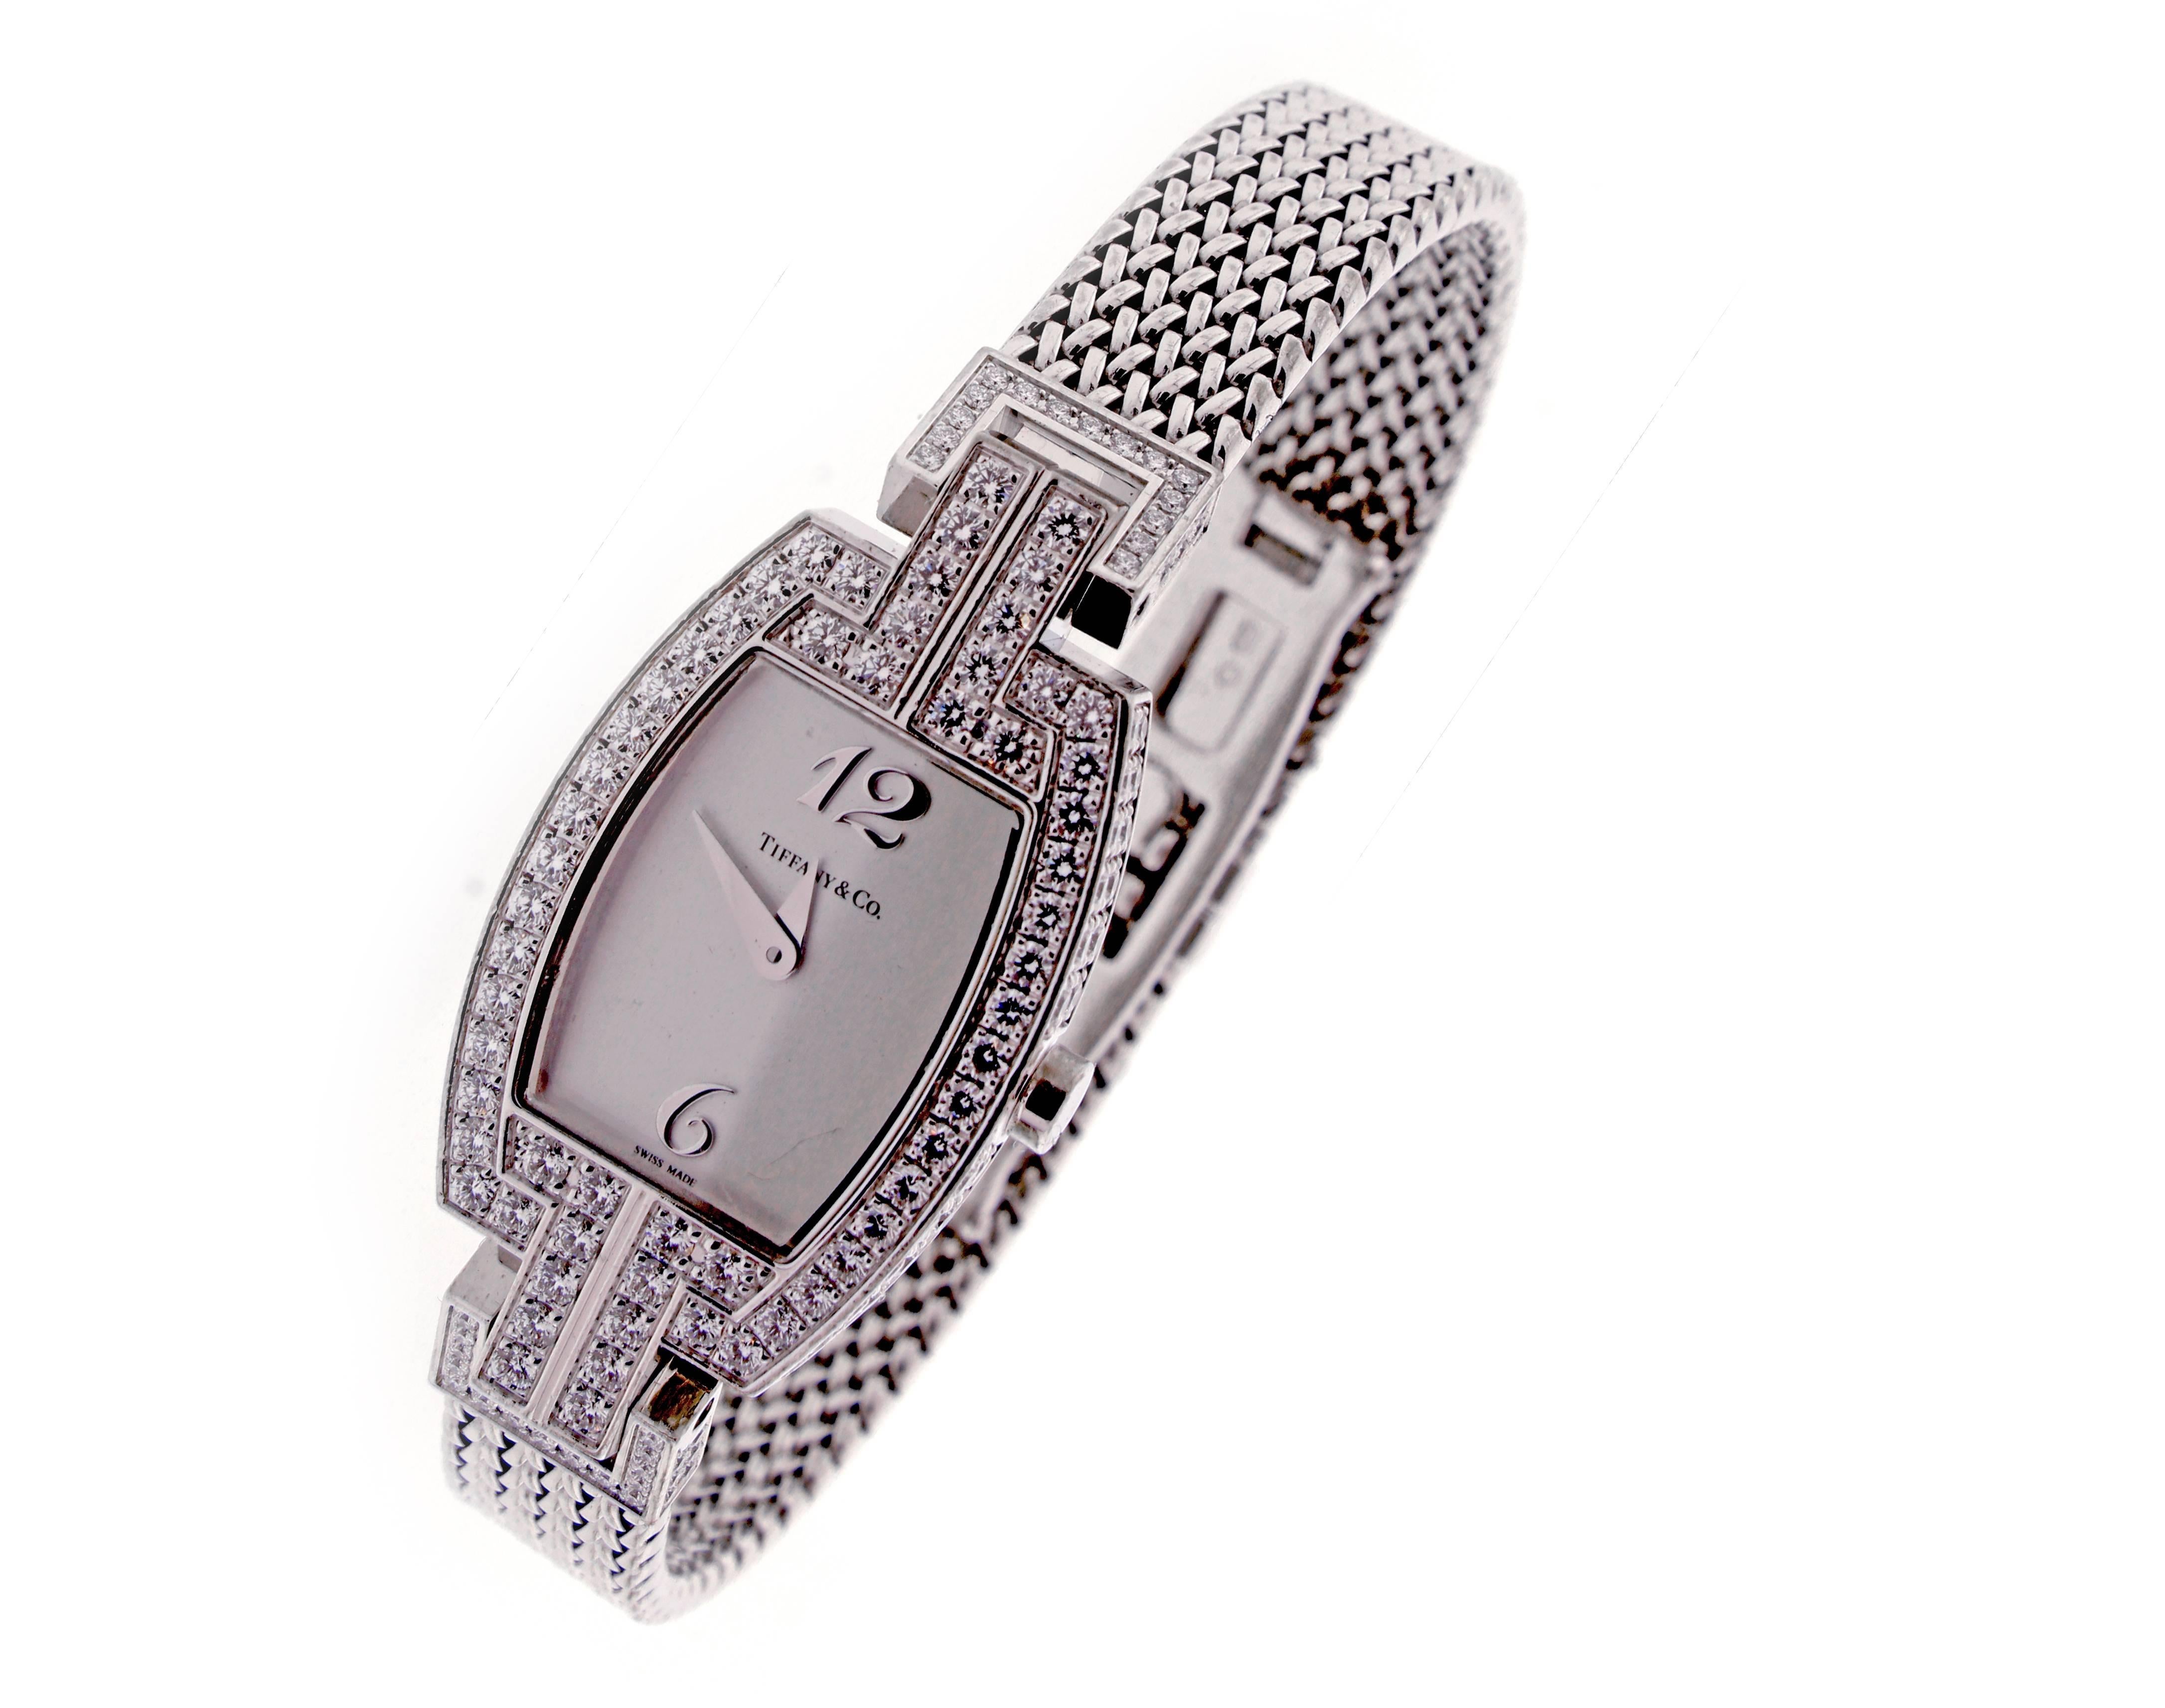 Fro, Tiffany & Co. thier elegant Tonneau ladies 18 Karat watch. The watch is set with 168 diamond weighing 2.04 carats.
 The case measures 22mm x 18mm with a 9mm strap and double deployment clasp. High-grade quartz movement and sapphire crystal.